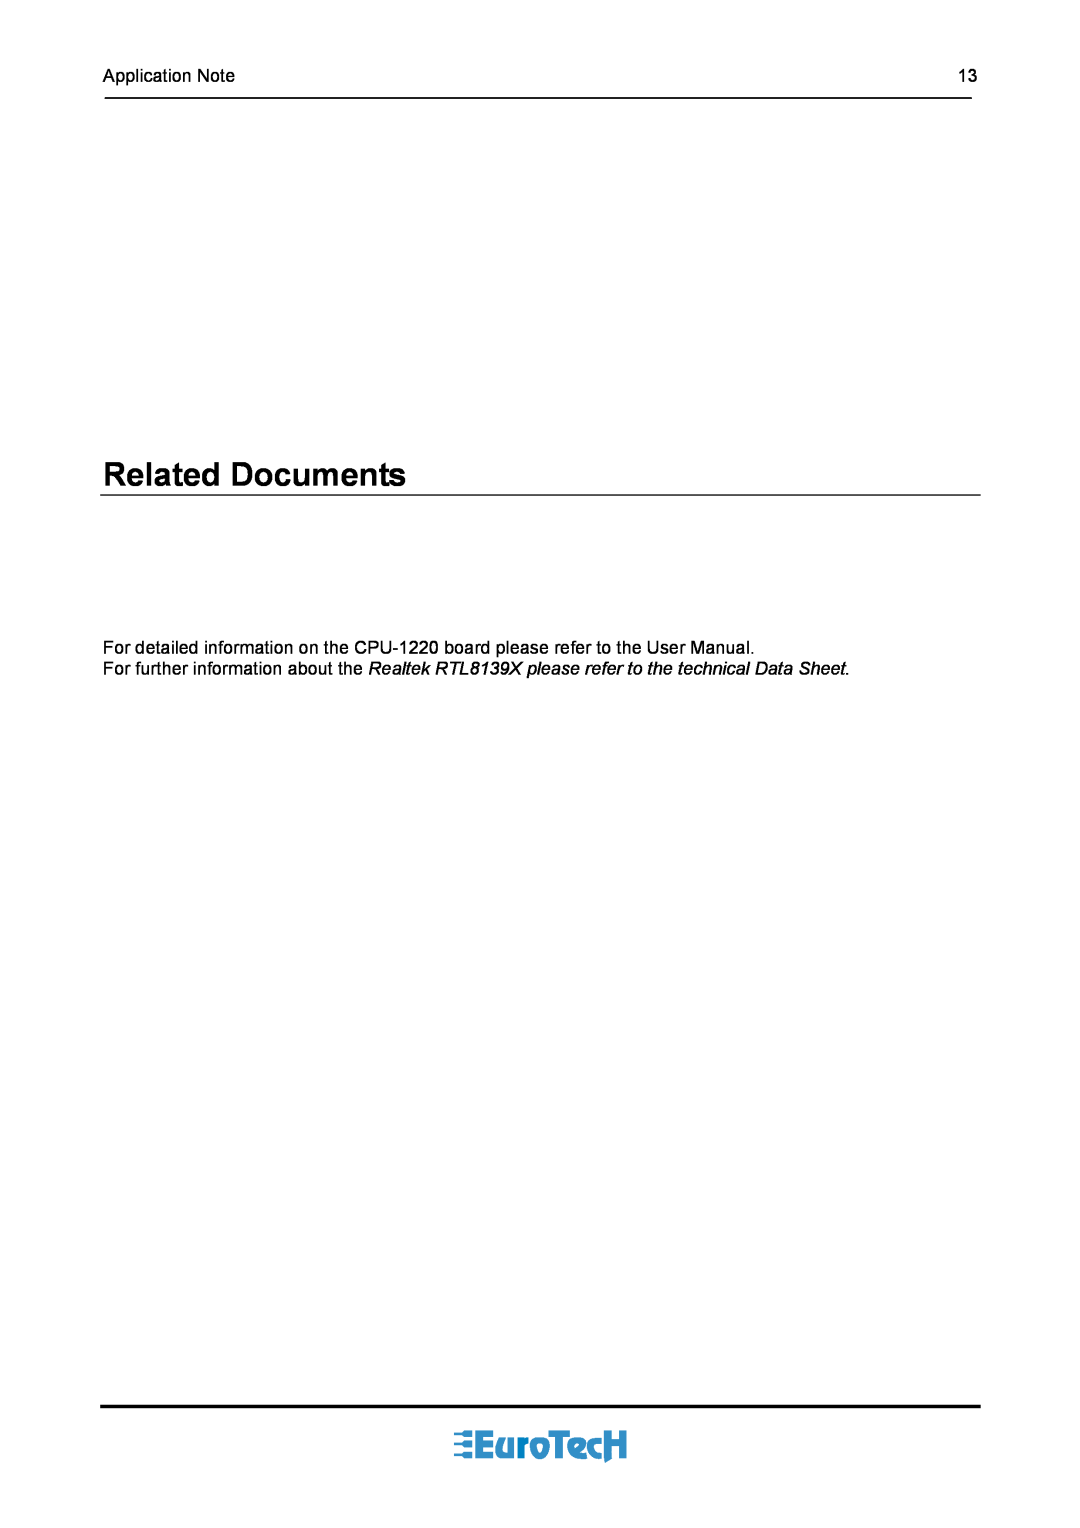 Eurotech Appliances An0038 manual Related Documents 